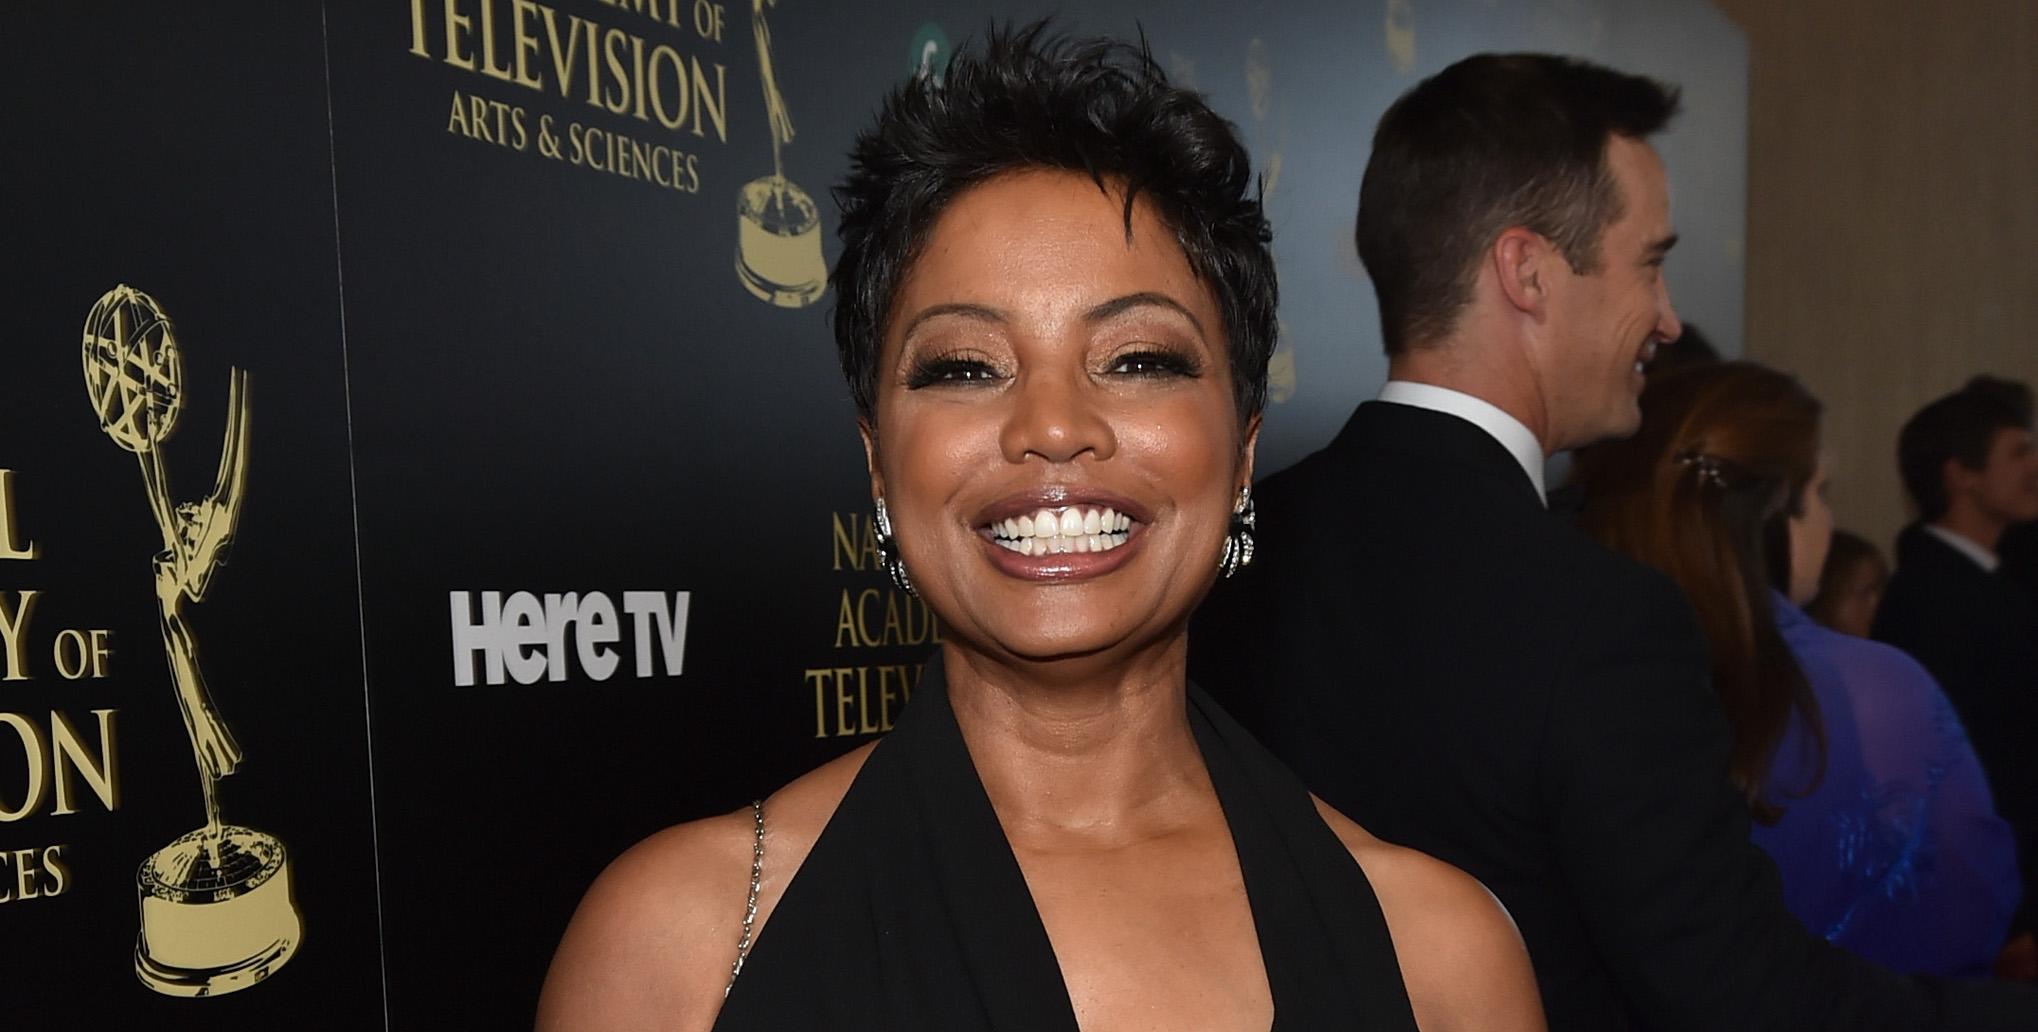 Is Lynn Toler From or Quit' a Real Judge?